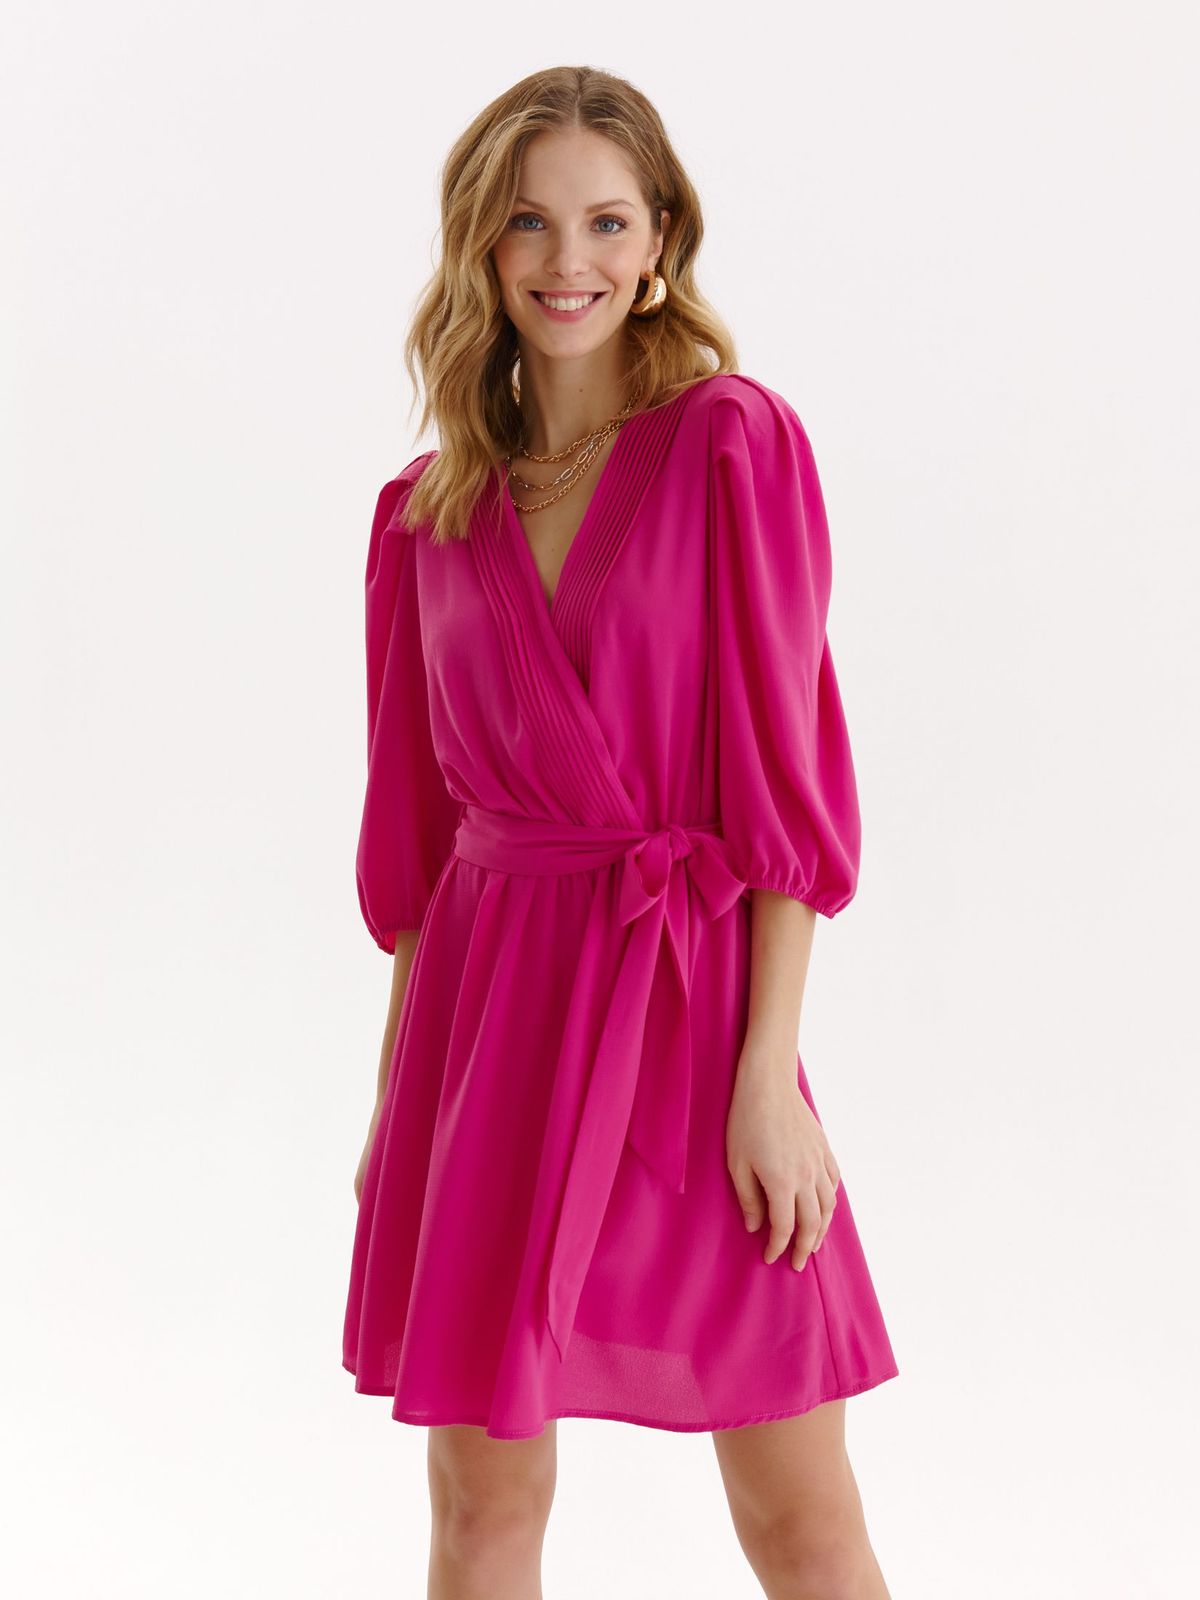 Pink dress short cut cloche with elastic waist thin fabric with puffed sleeves